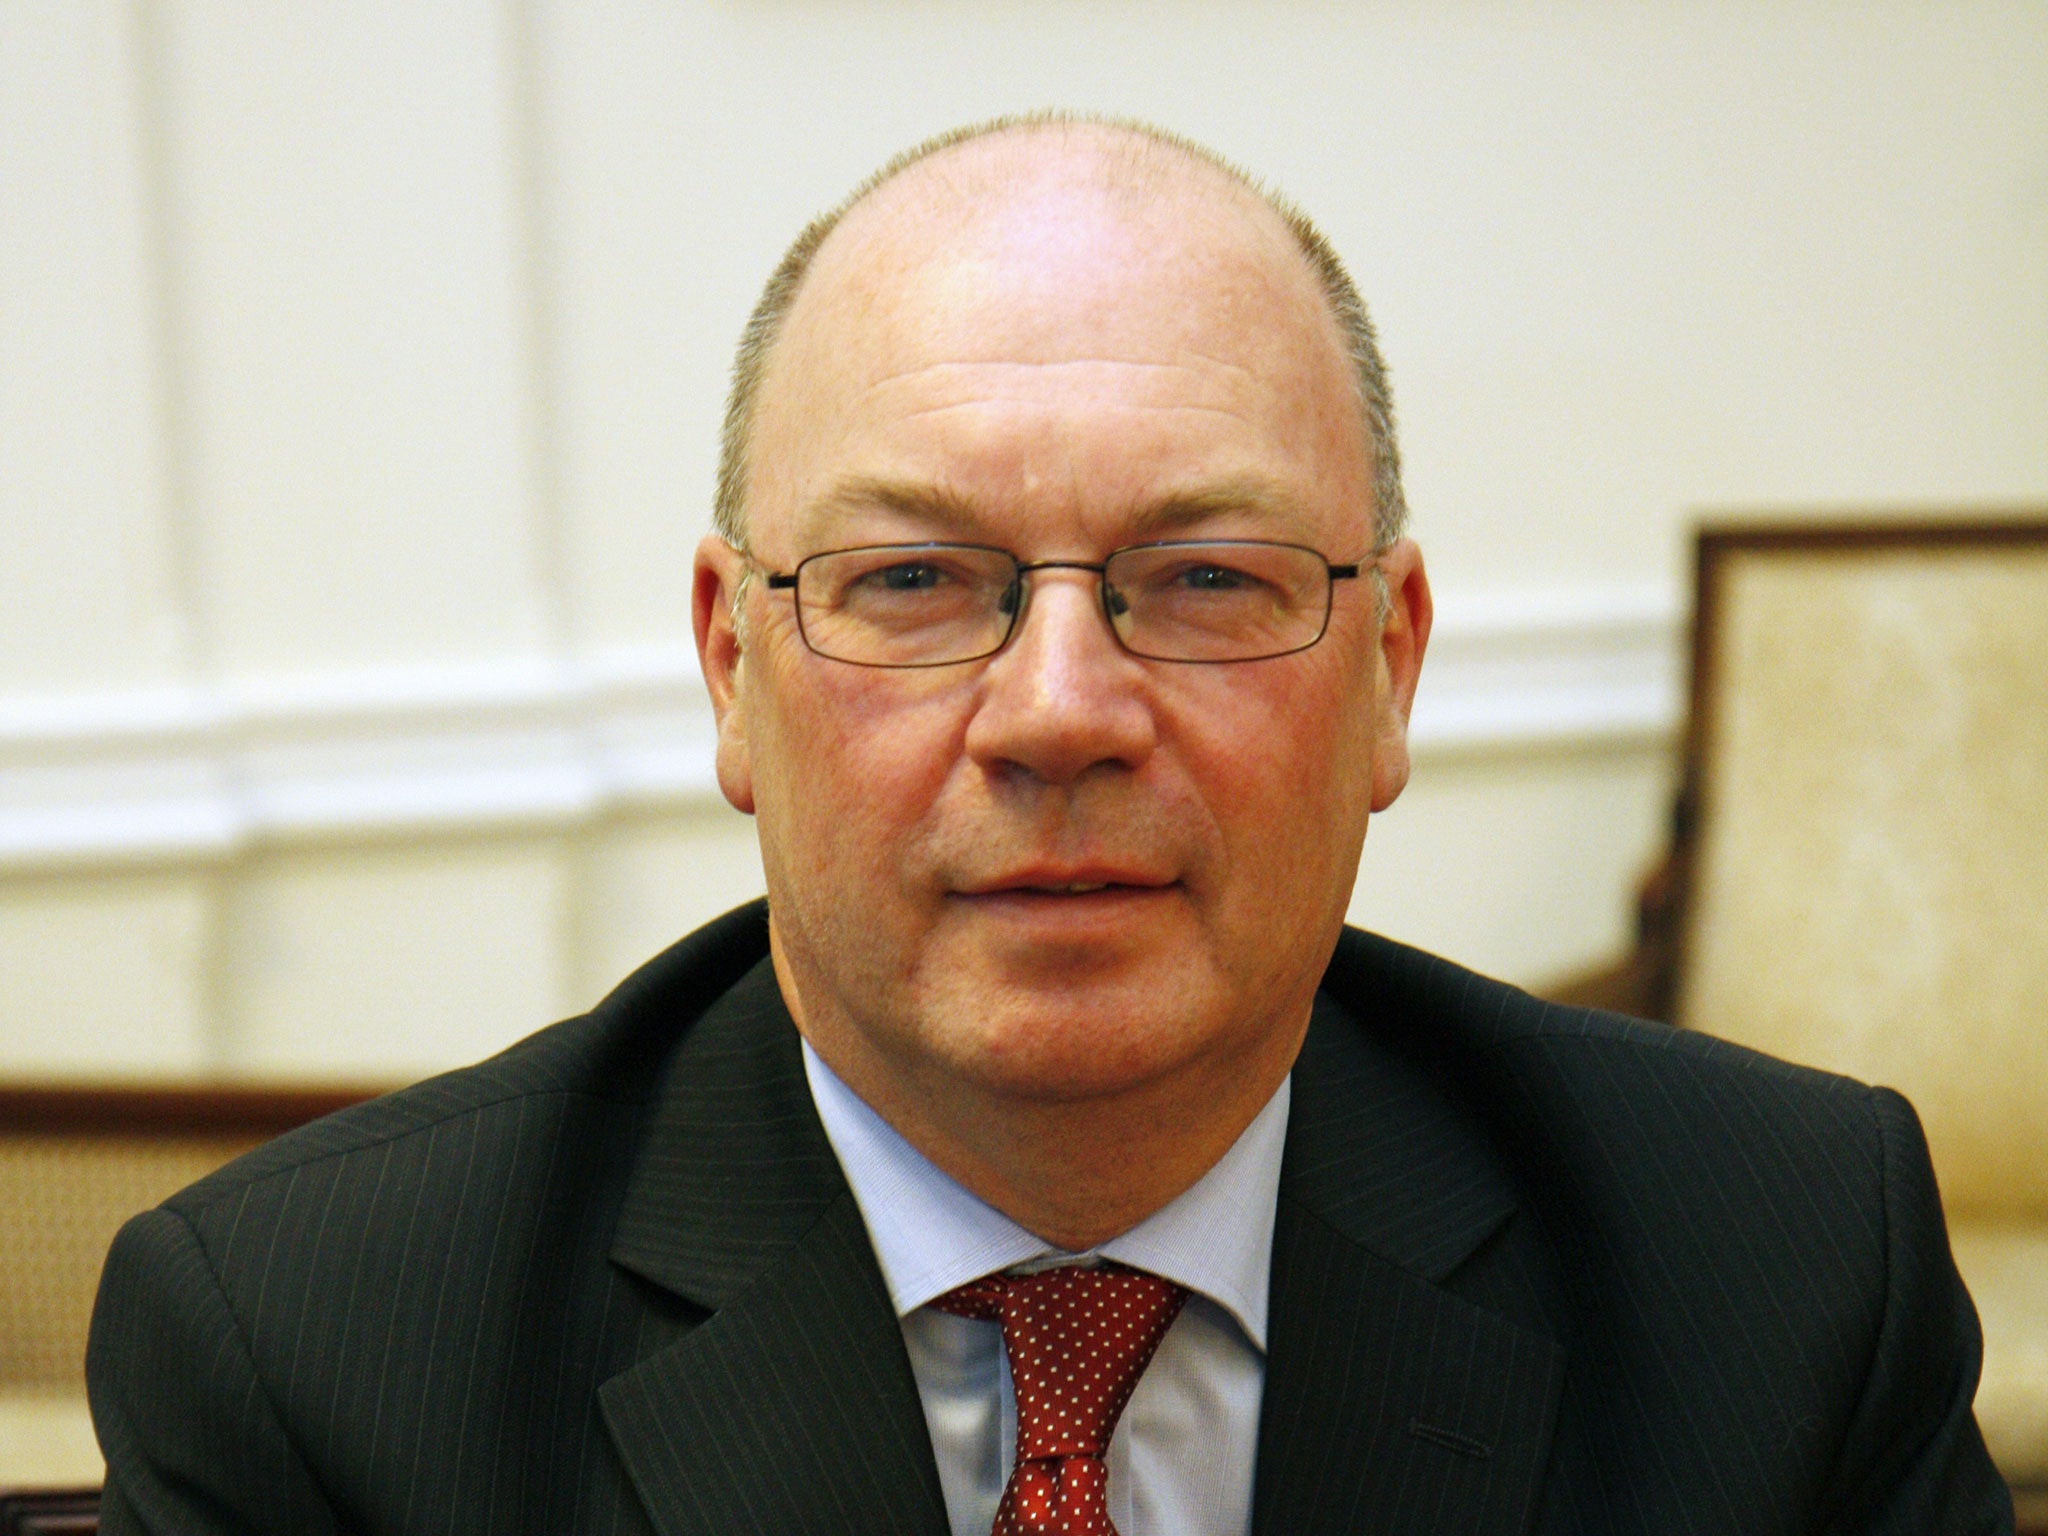 Minister Alistair Burt has now taken down the survey from his website